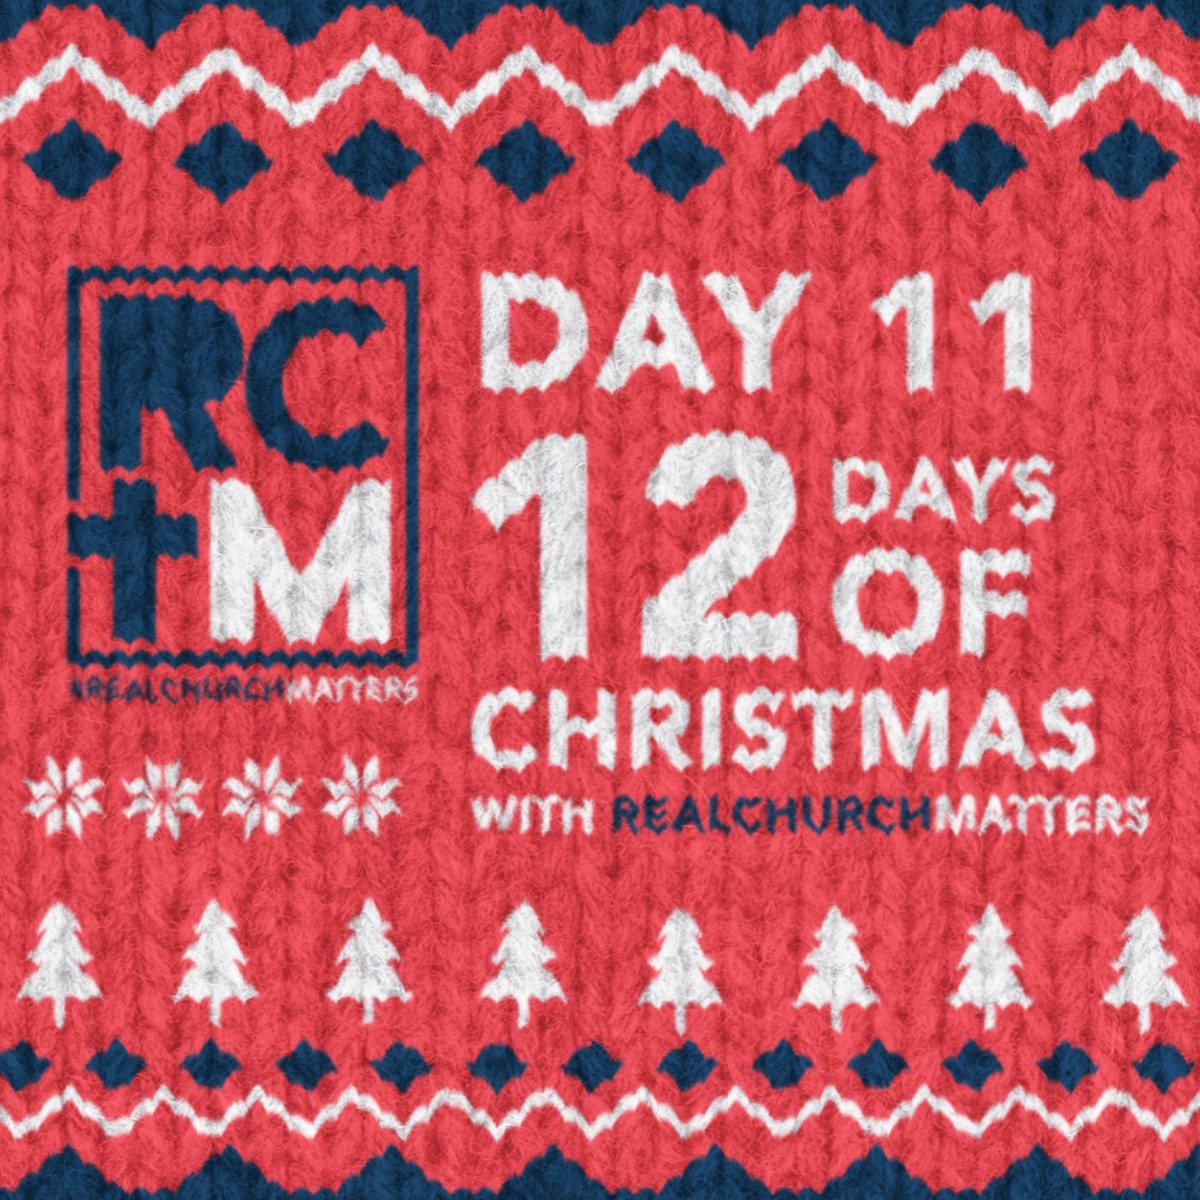 Day 11 - 12 Days of Christmas with Real Church Matters